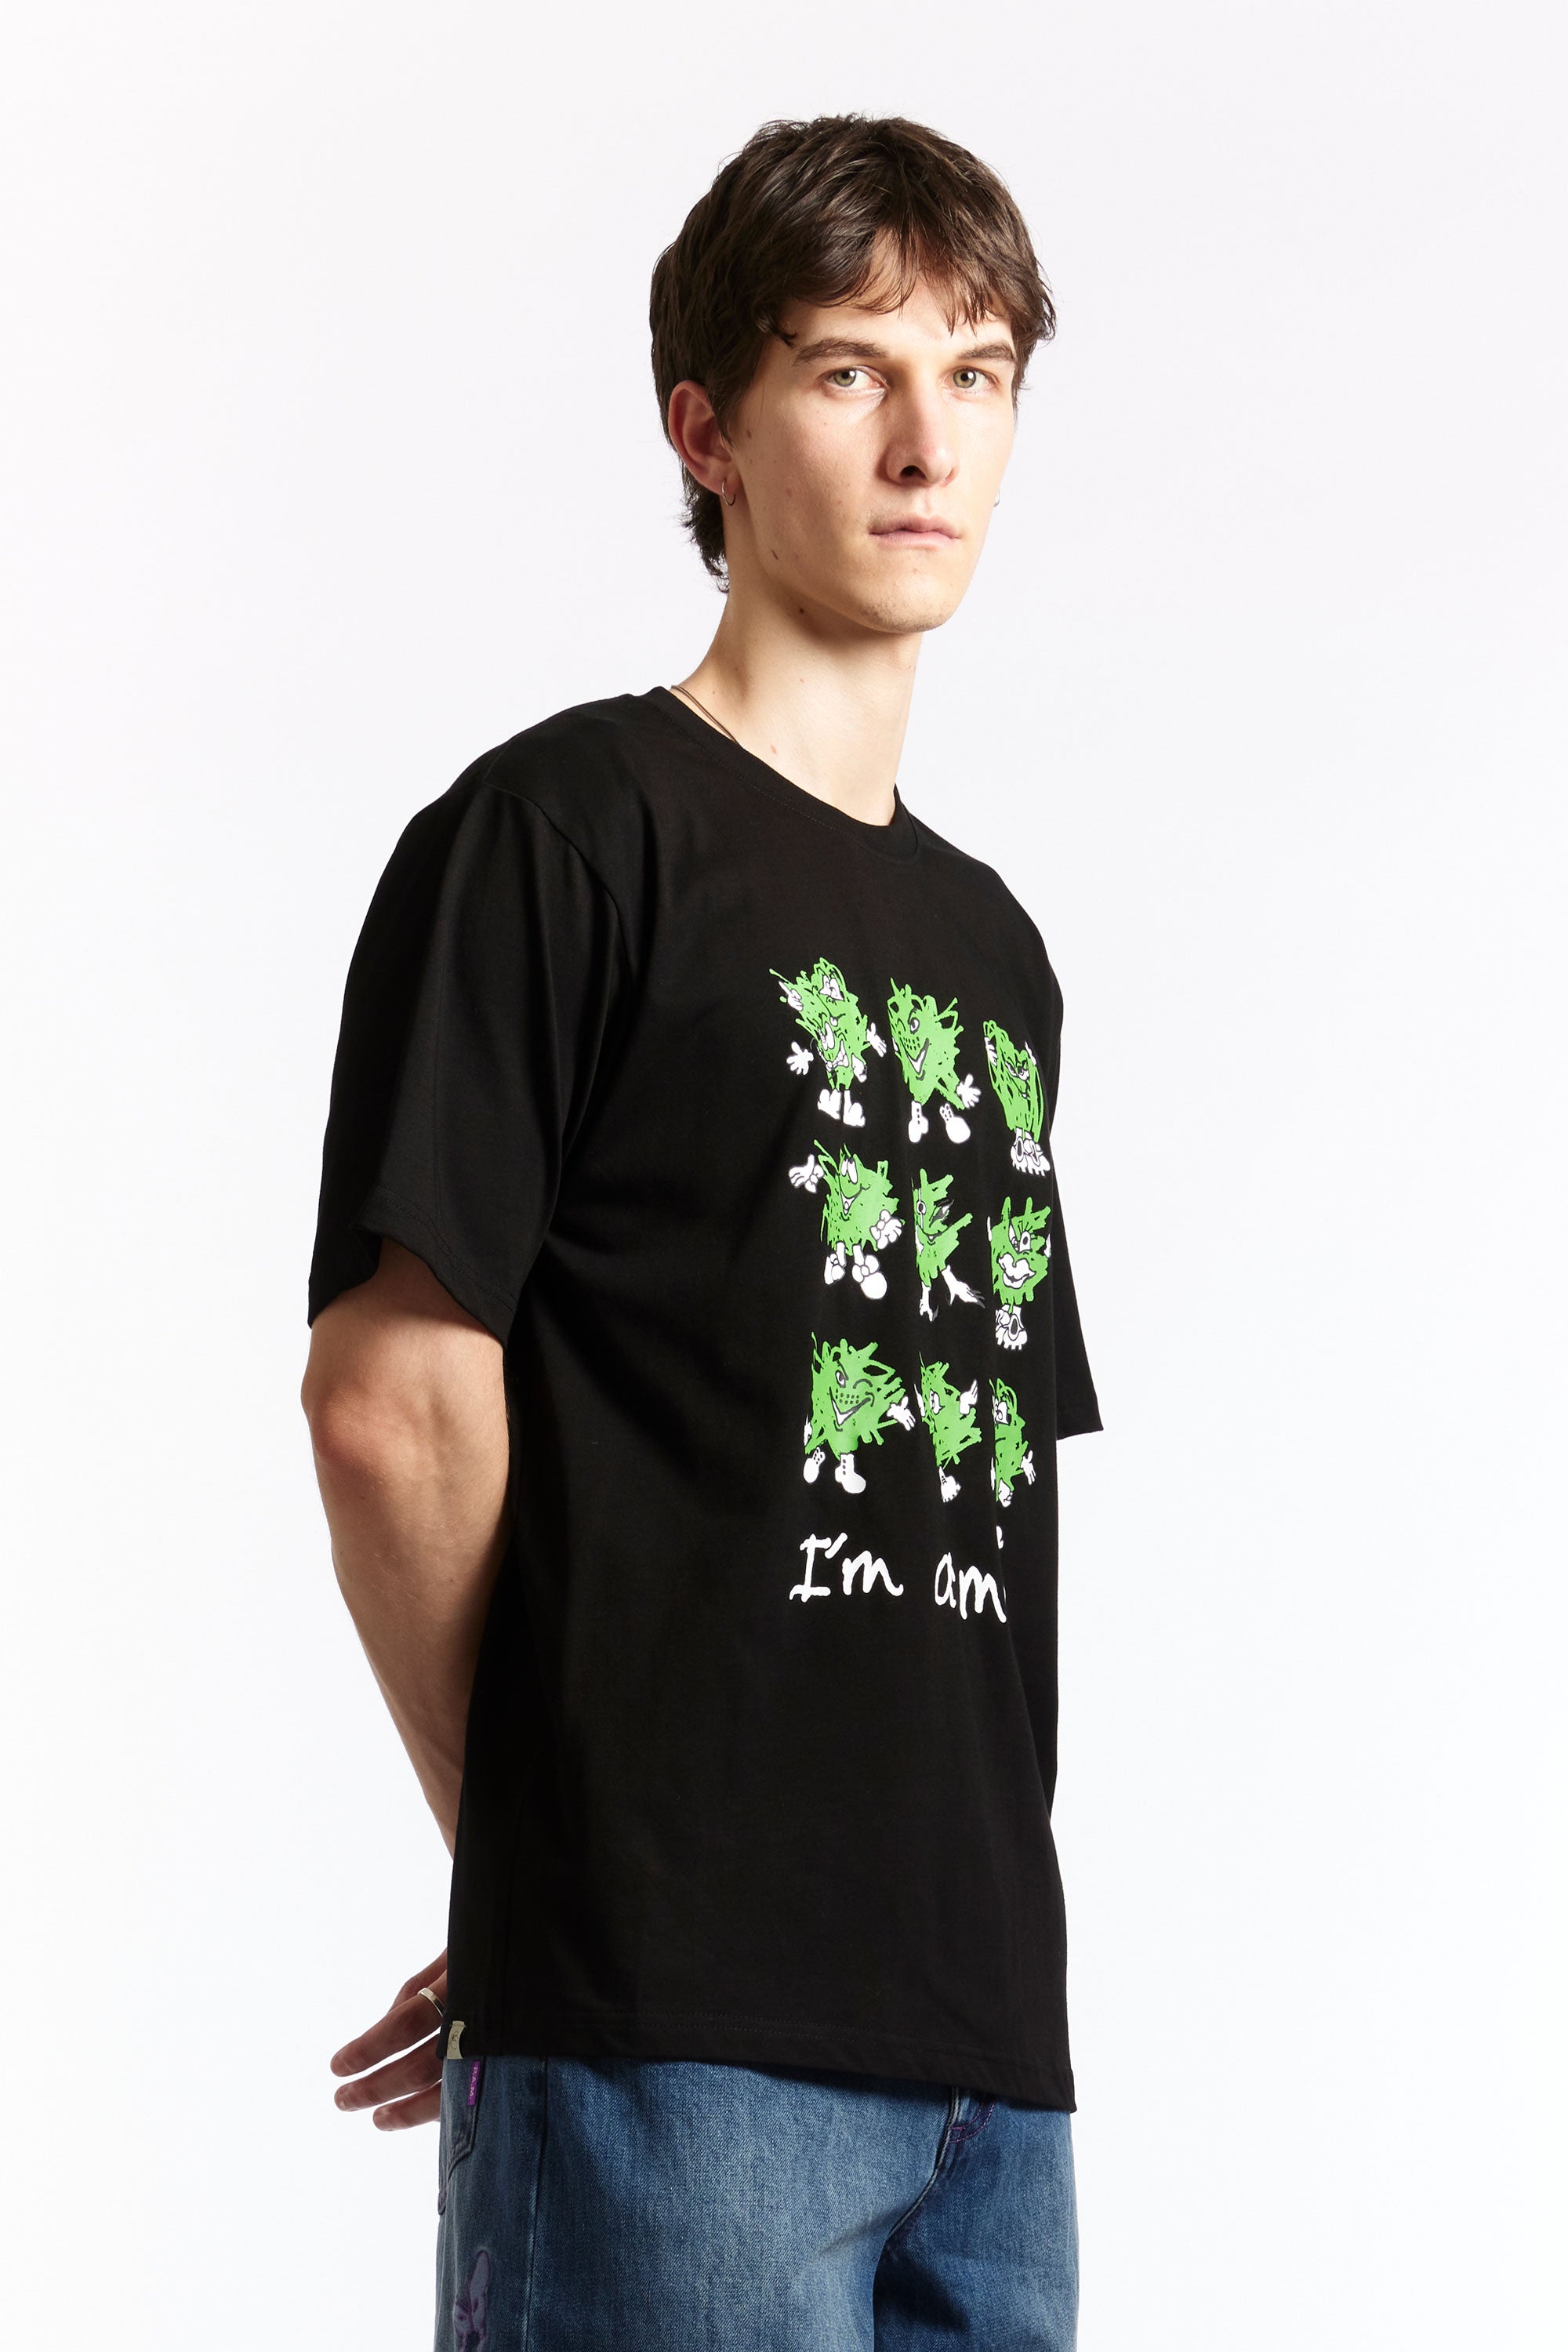 The I'm A Mess SS Tee  available online with global shipping, and in PAM Stores Melbourne and Sydney.